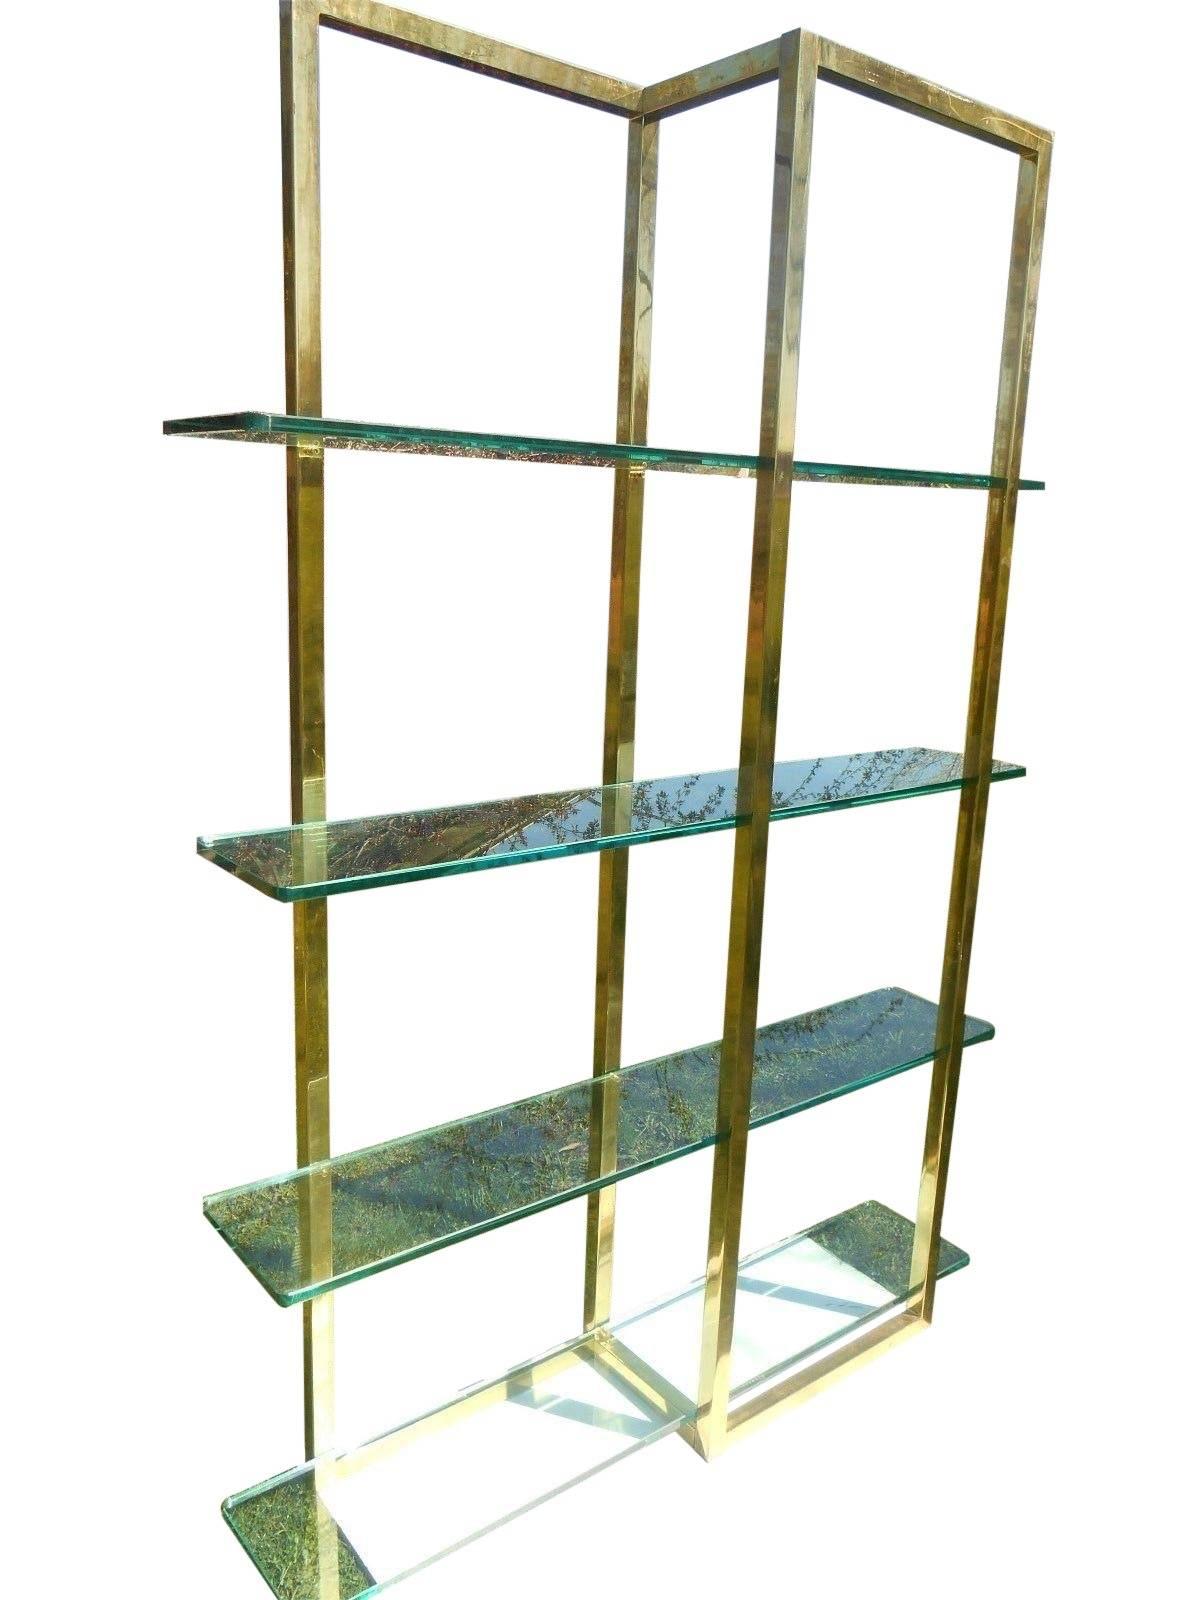 Gorgeous designer étagère from the 1970s. Quality 3/4 thick green glass shelves. Slim profile, finished on both sides and able to float in a room. 64